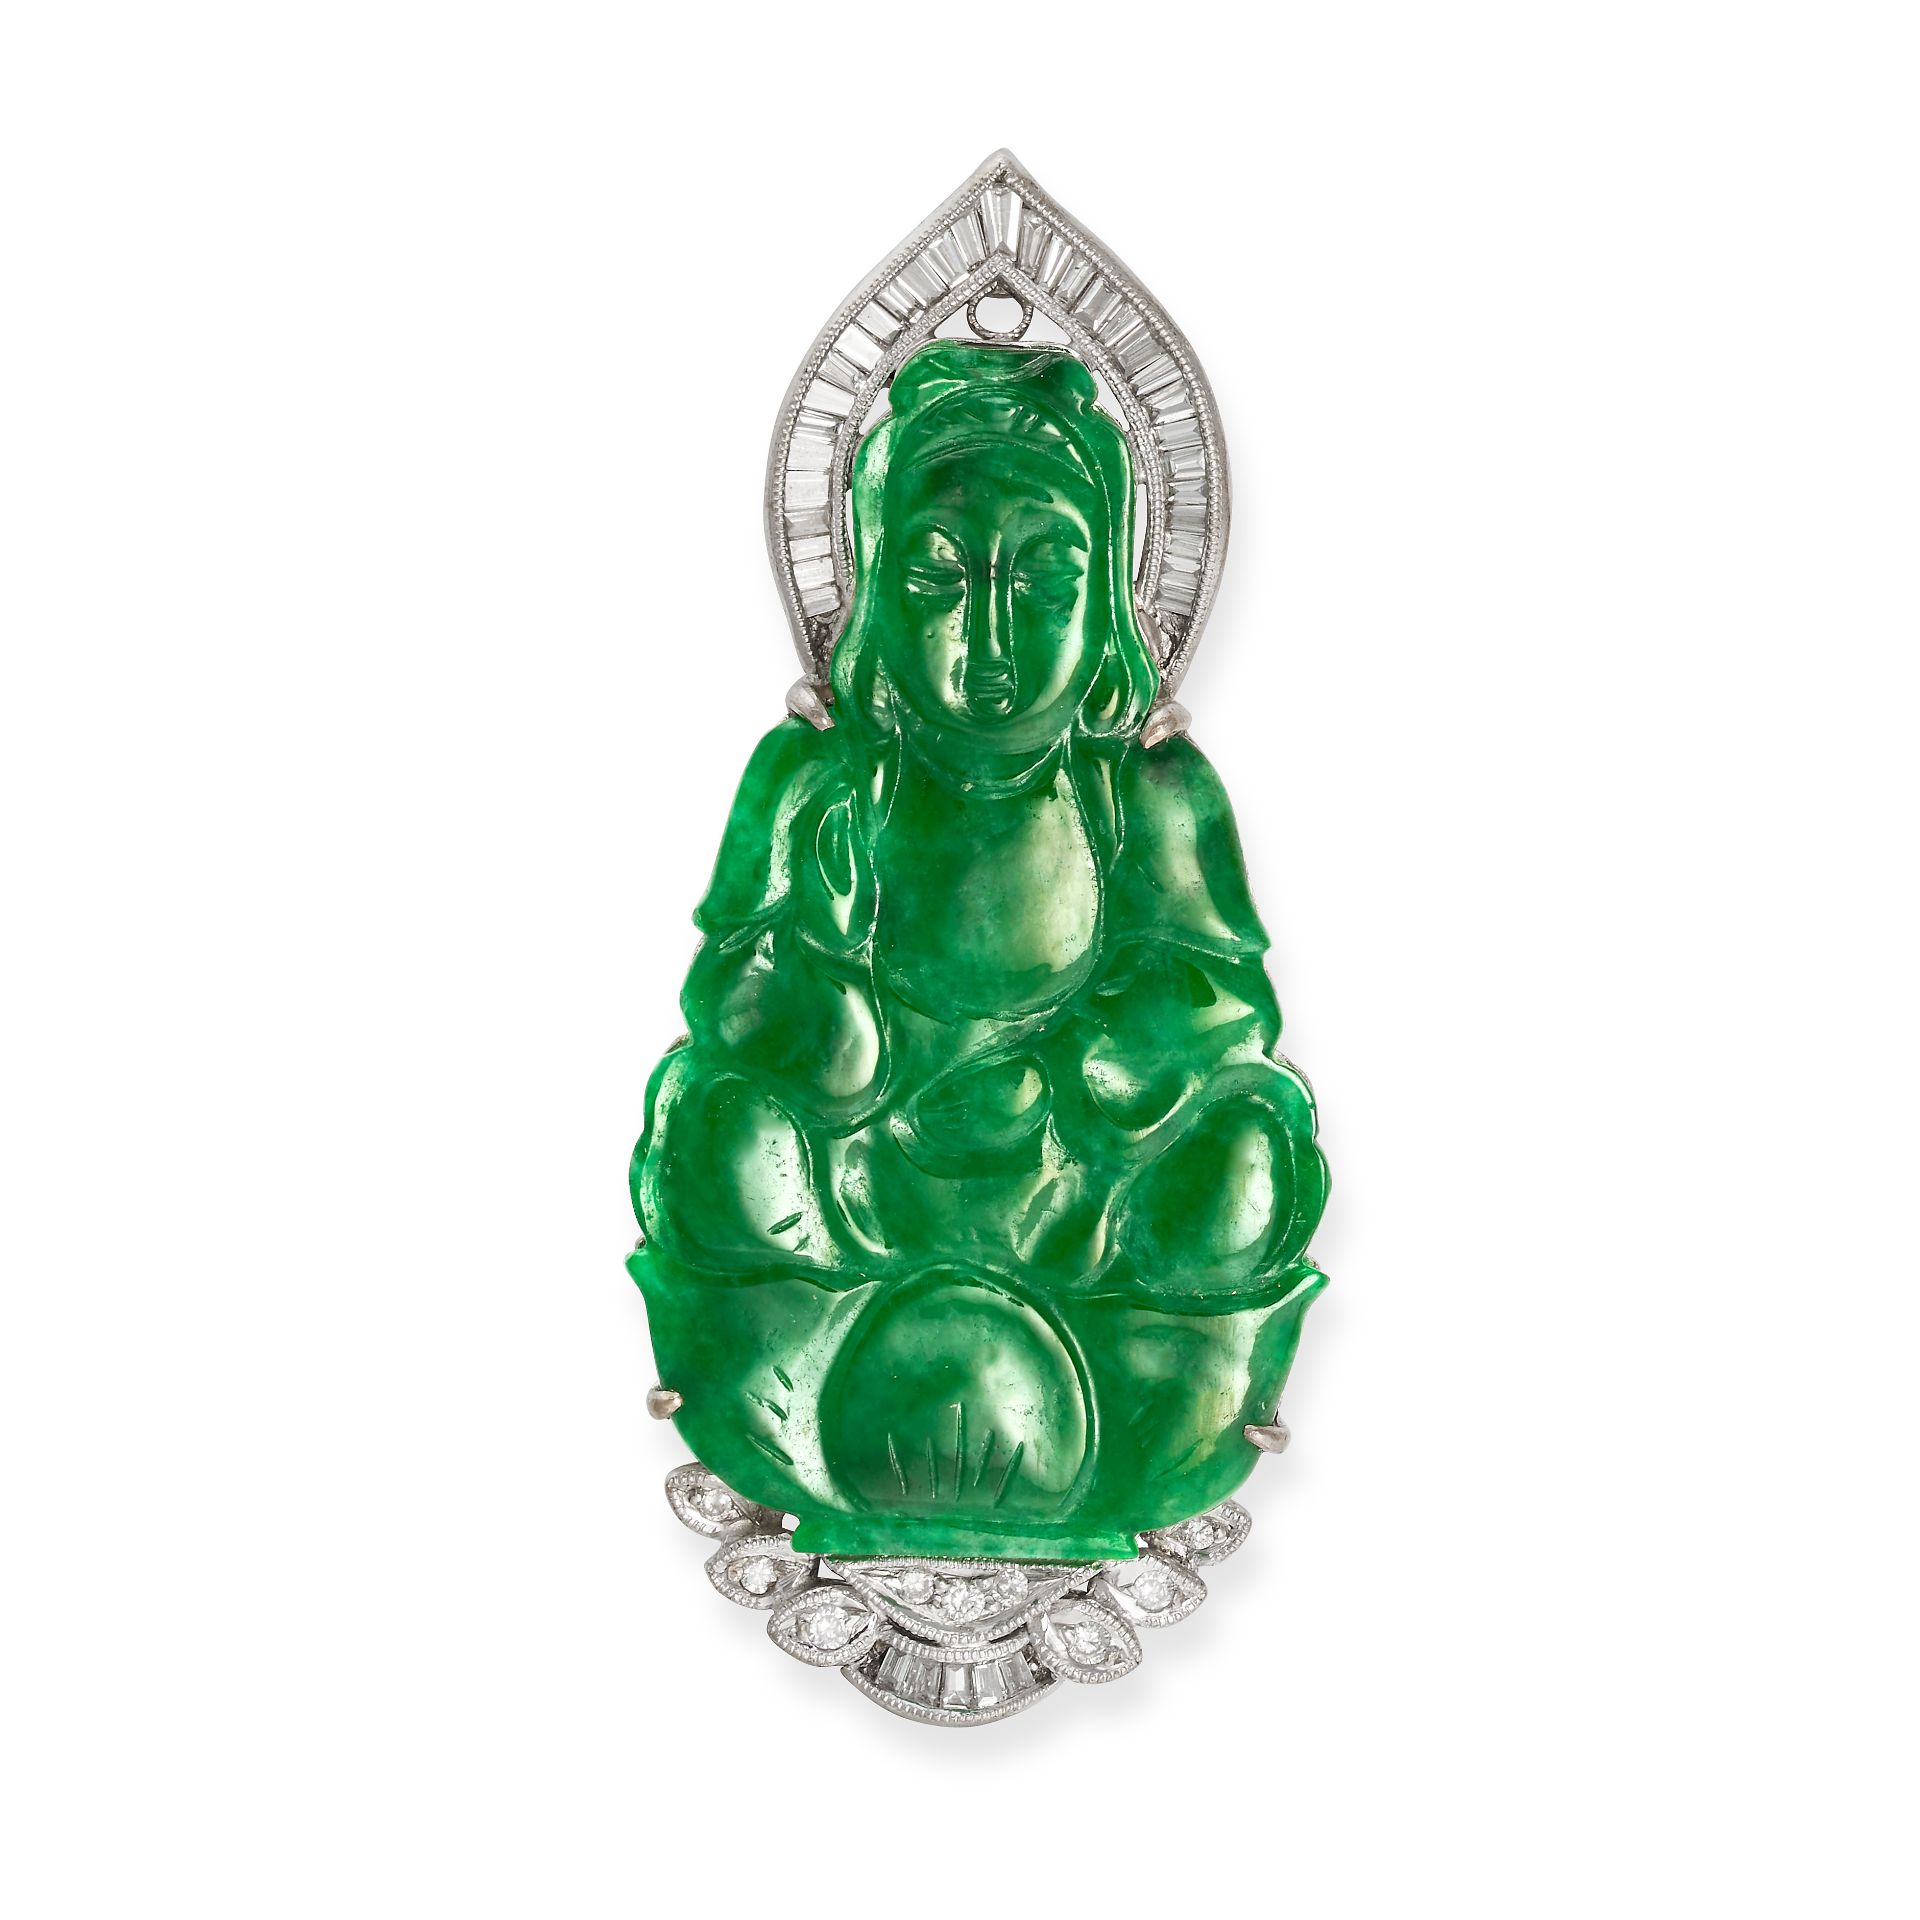 A JADEITE JADE AND DIAMOND BUDDHA PENDANT set with a piece of jadeite jade carved to depict the s...